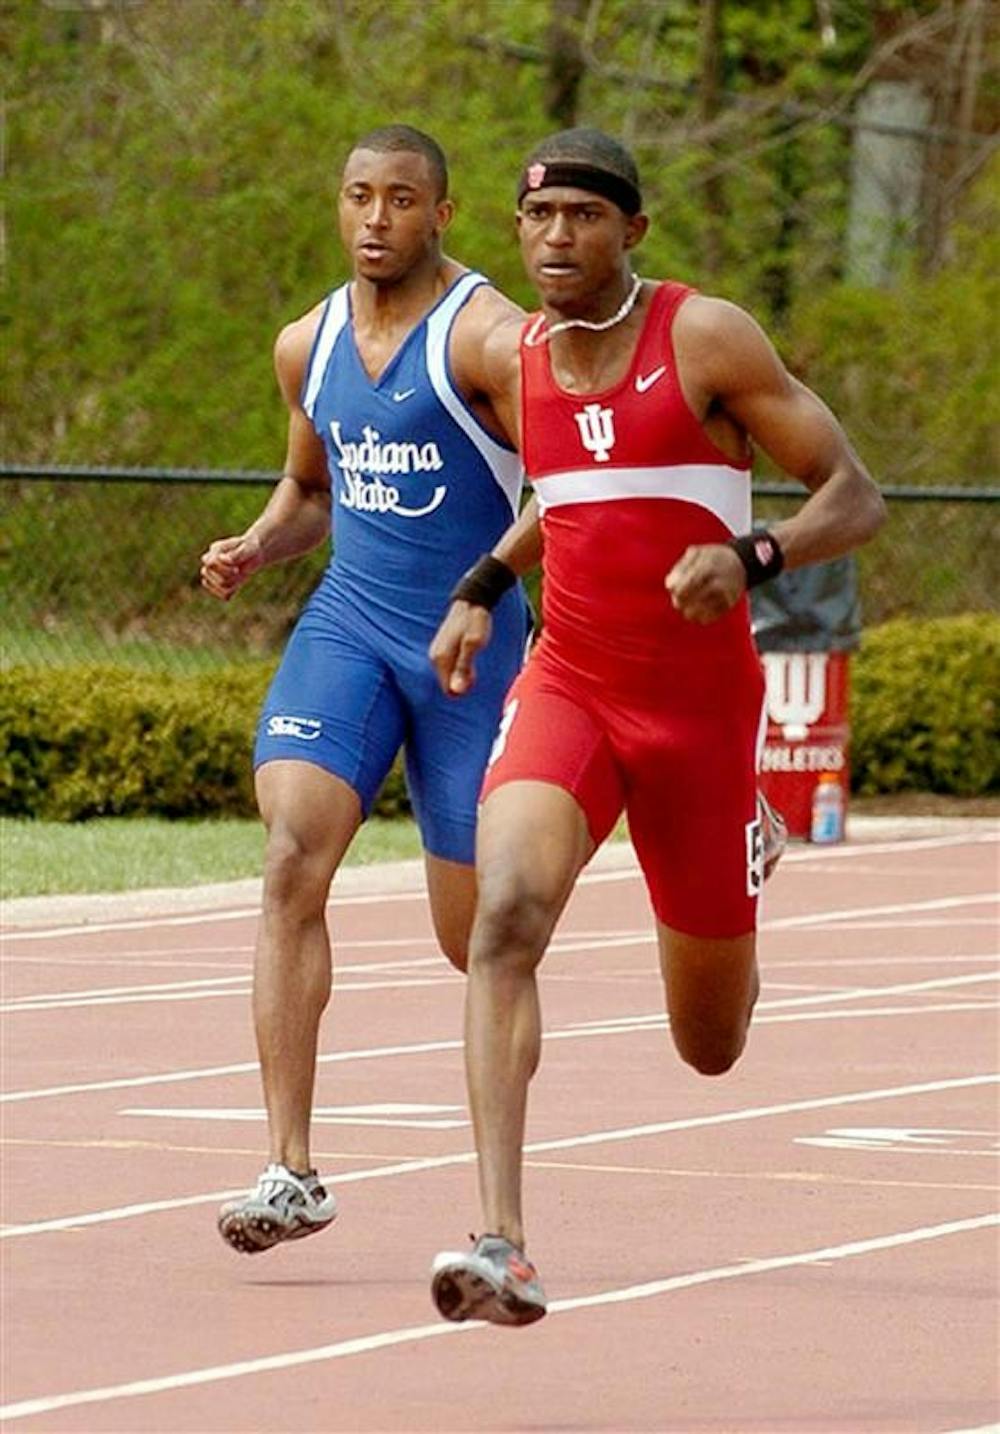 IU alum and All-American David Neville, shown here in a 2004 event, races past the competition during the Indiana Relays on Saturday, April 10, 2004.